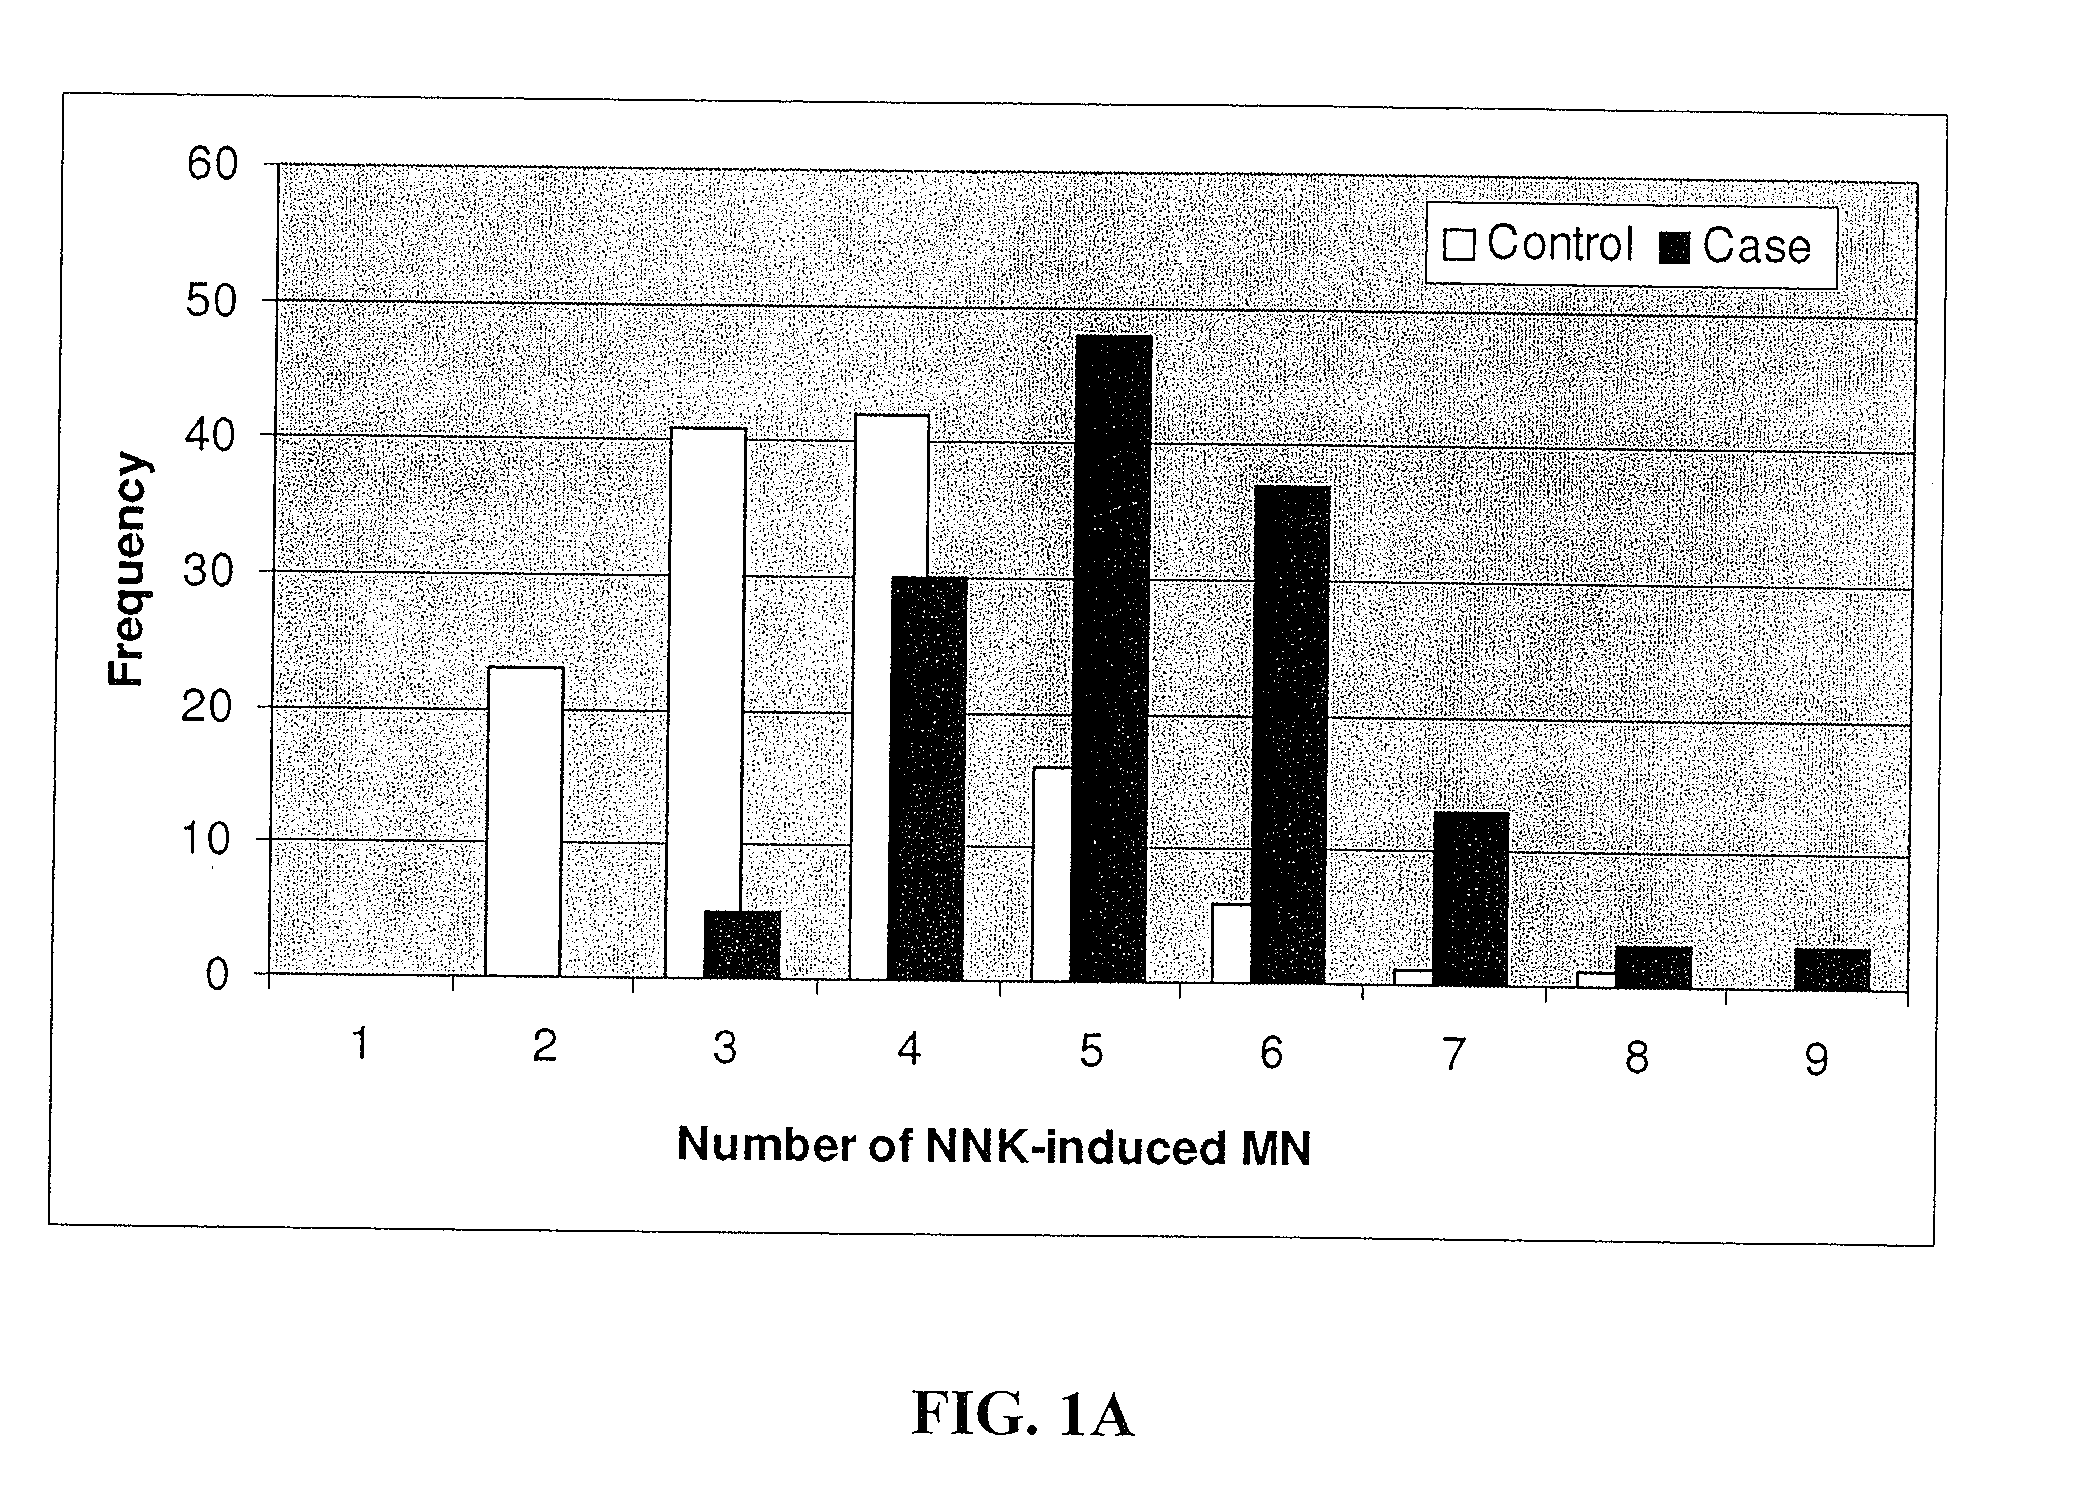 Methods for Assessing Cancer Susceptibility to Carcinogens in Tobacco Products